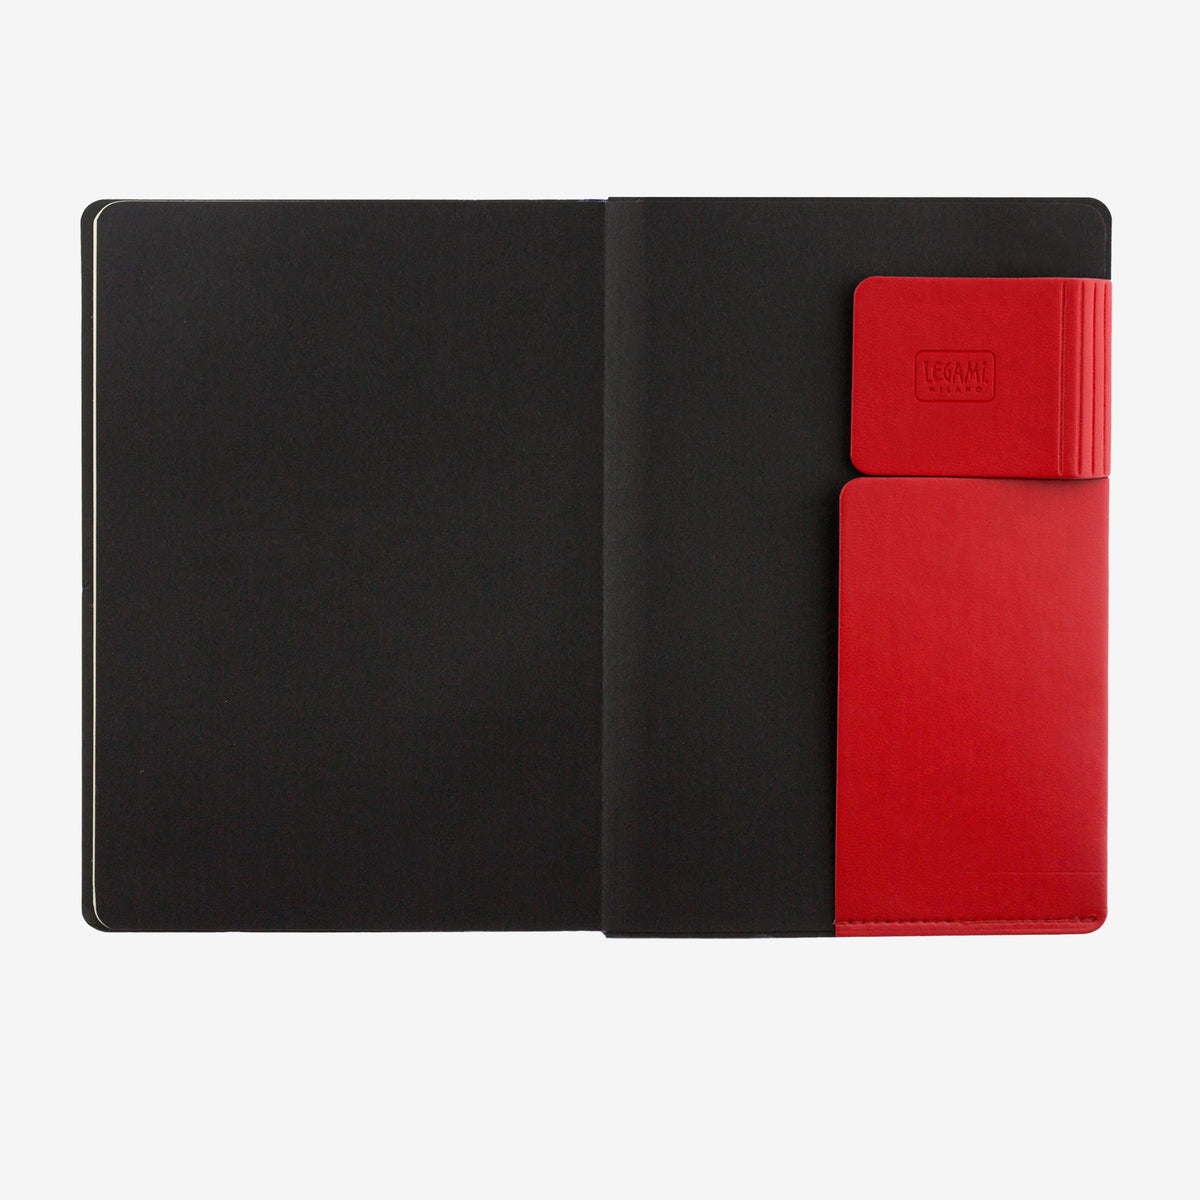 My notebook red last page legami gifts gift ideas gifting made simple